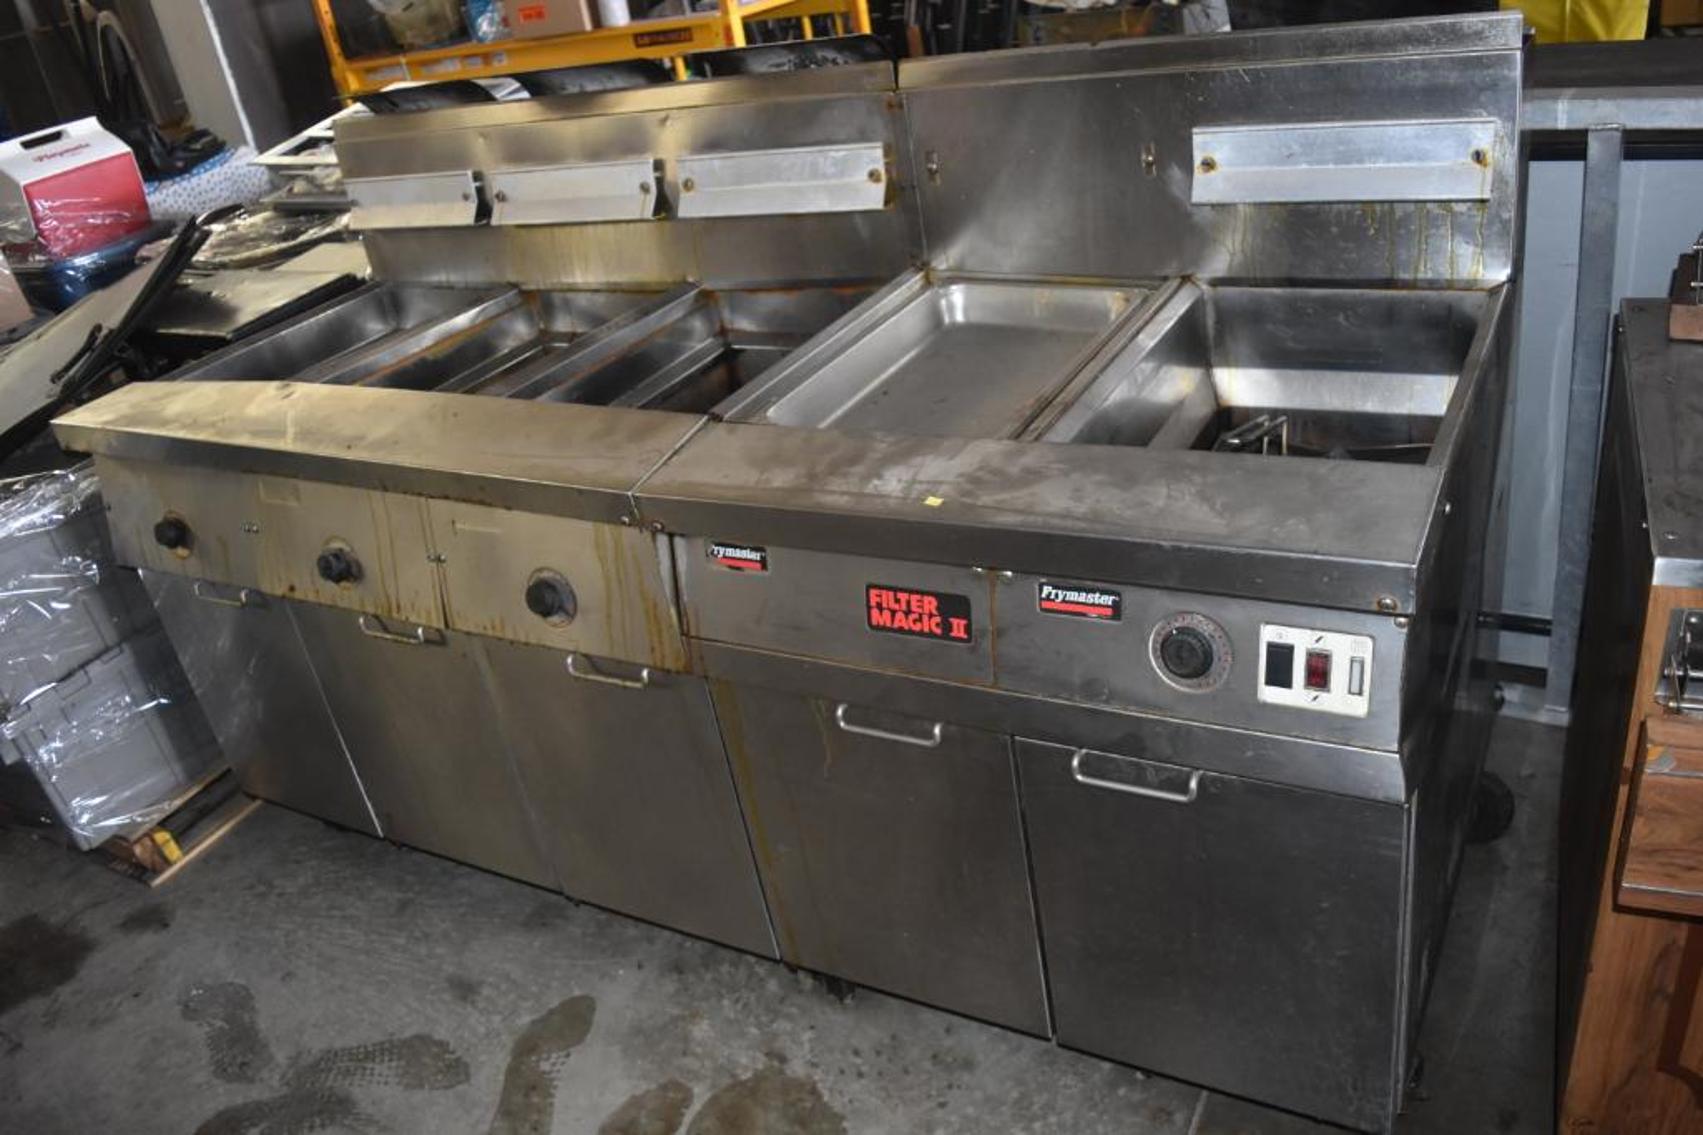 Catering, Prep Kitchen and Food Service Equipment